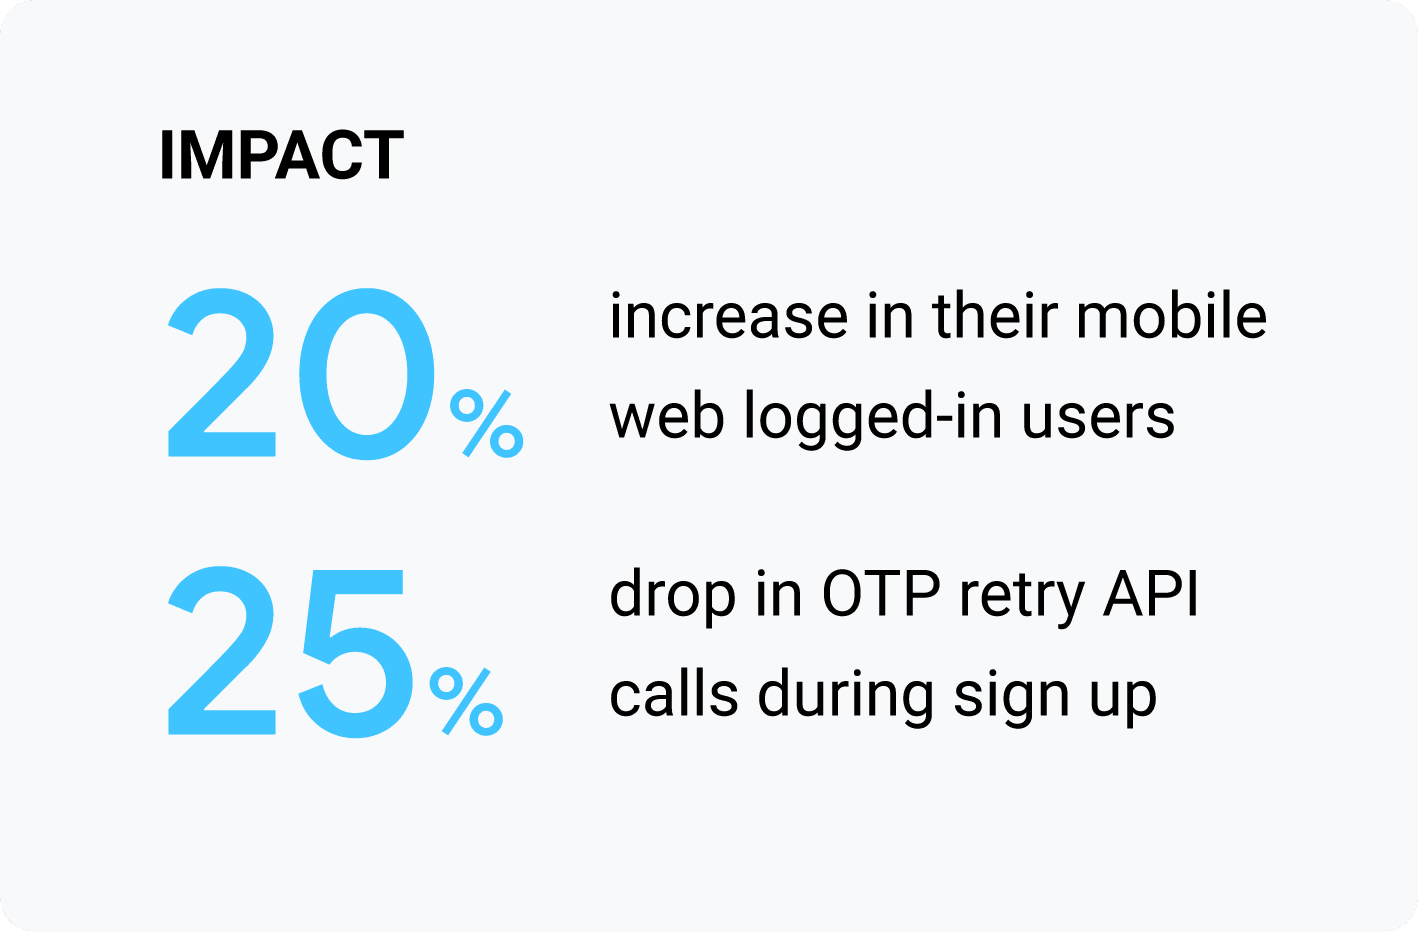 Impact: 20% increase in their mobile web logged-in users; 25% drop in OTP retry API calls during sign up.